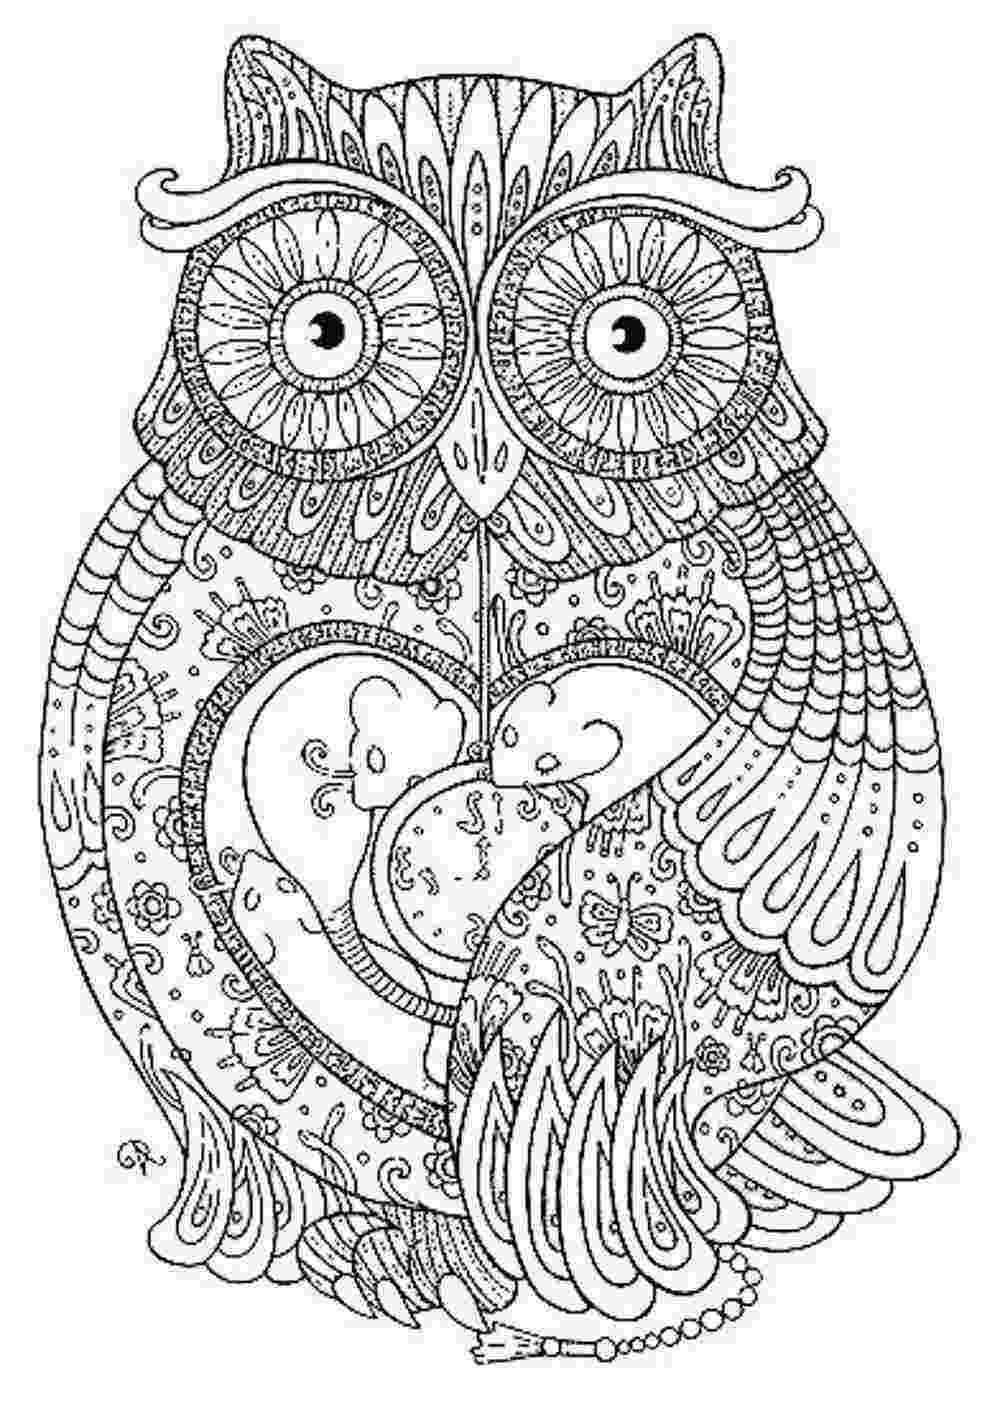 animal coloring pages adults animal coloring pages for adults best coloring pages for adults animal coloring pages 